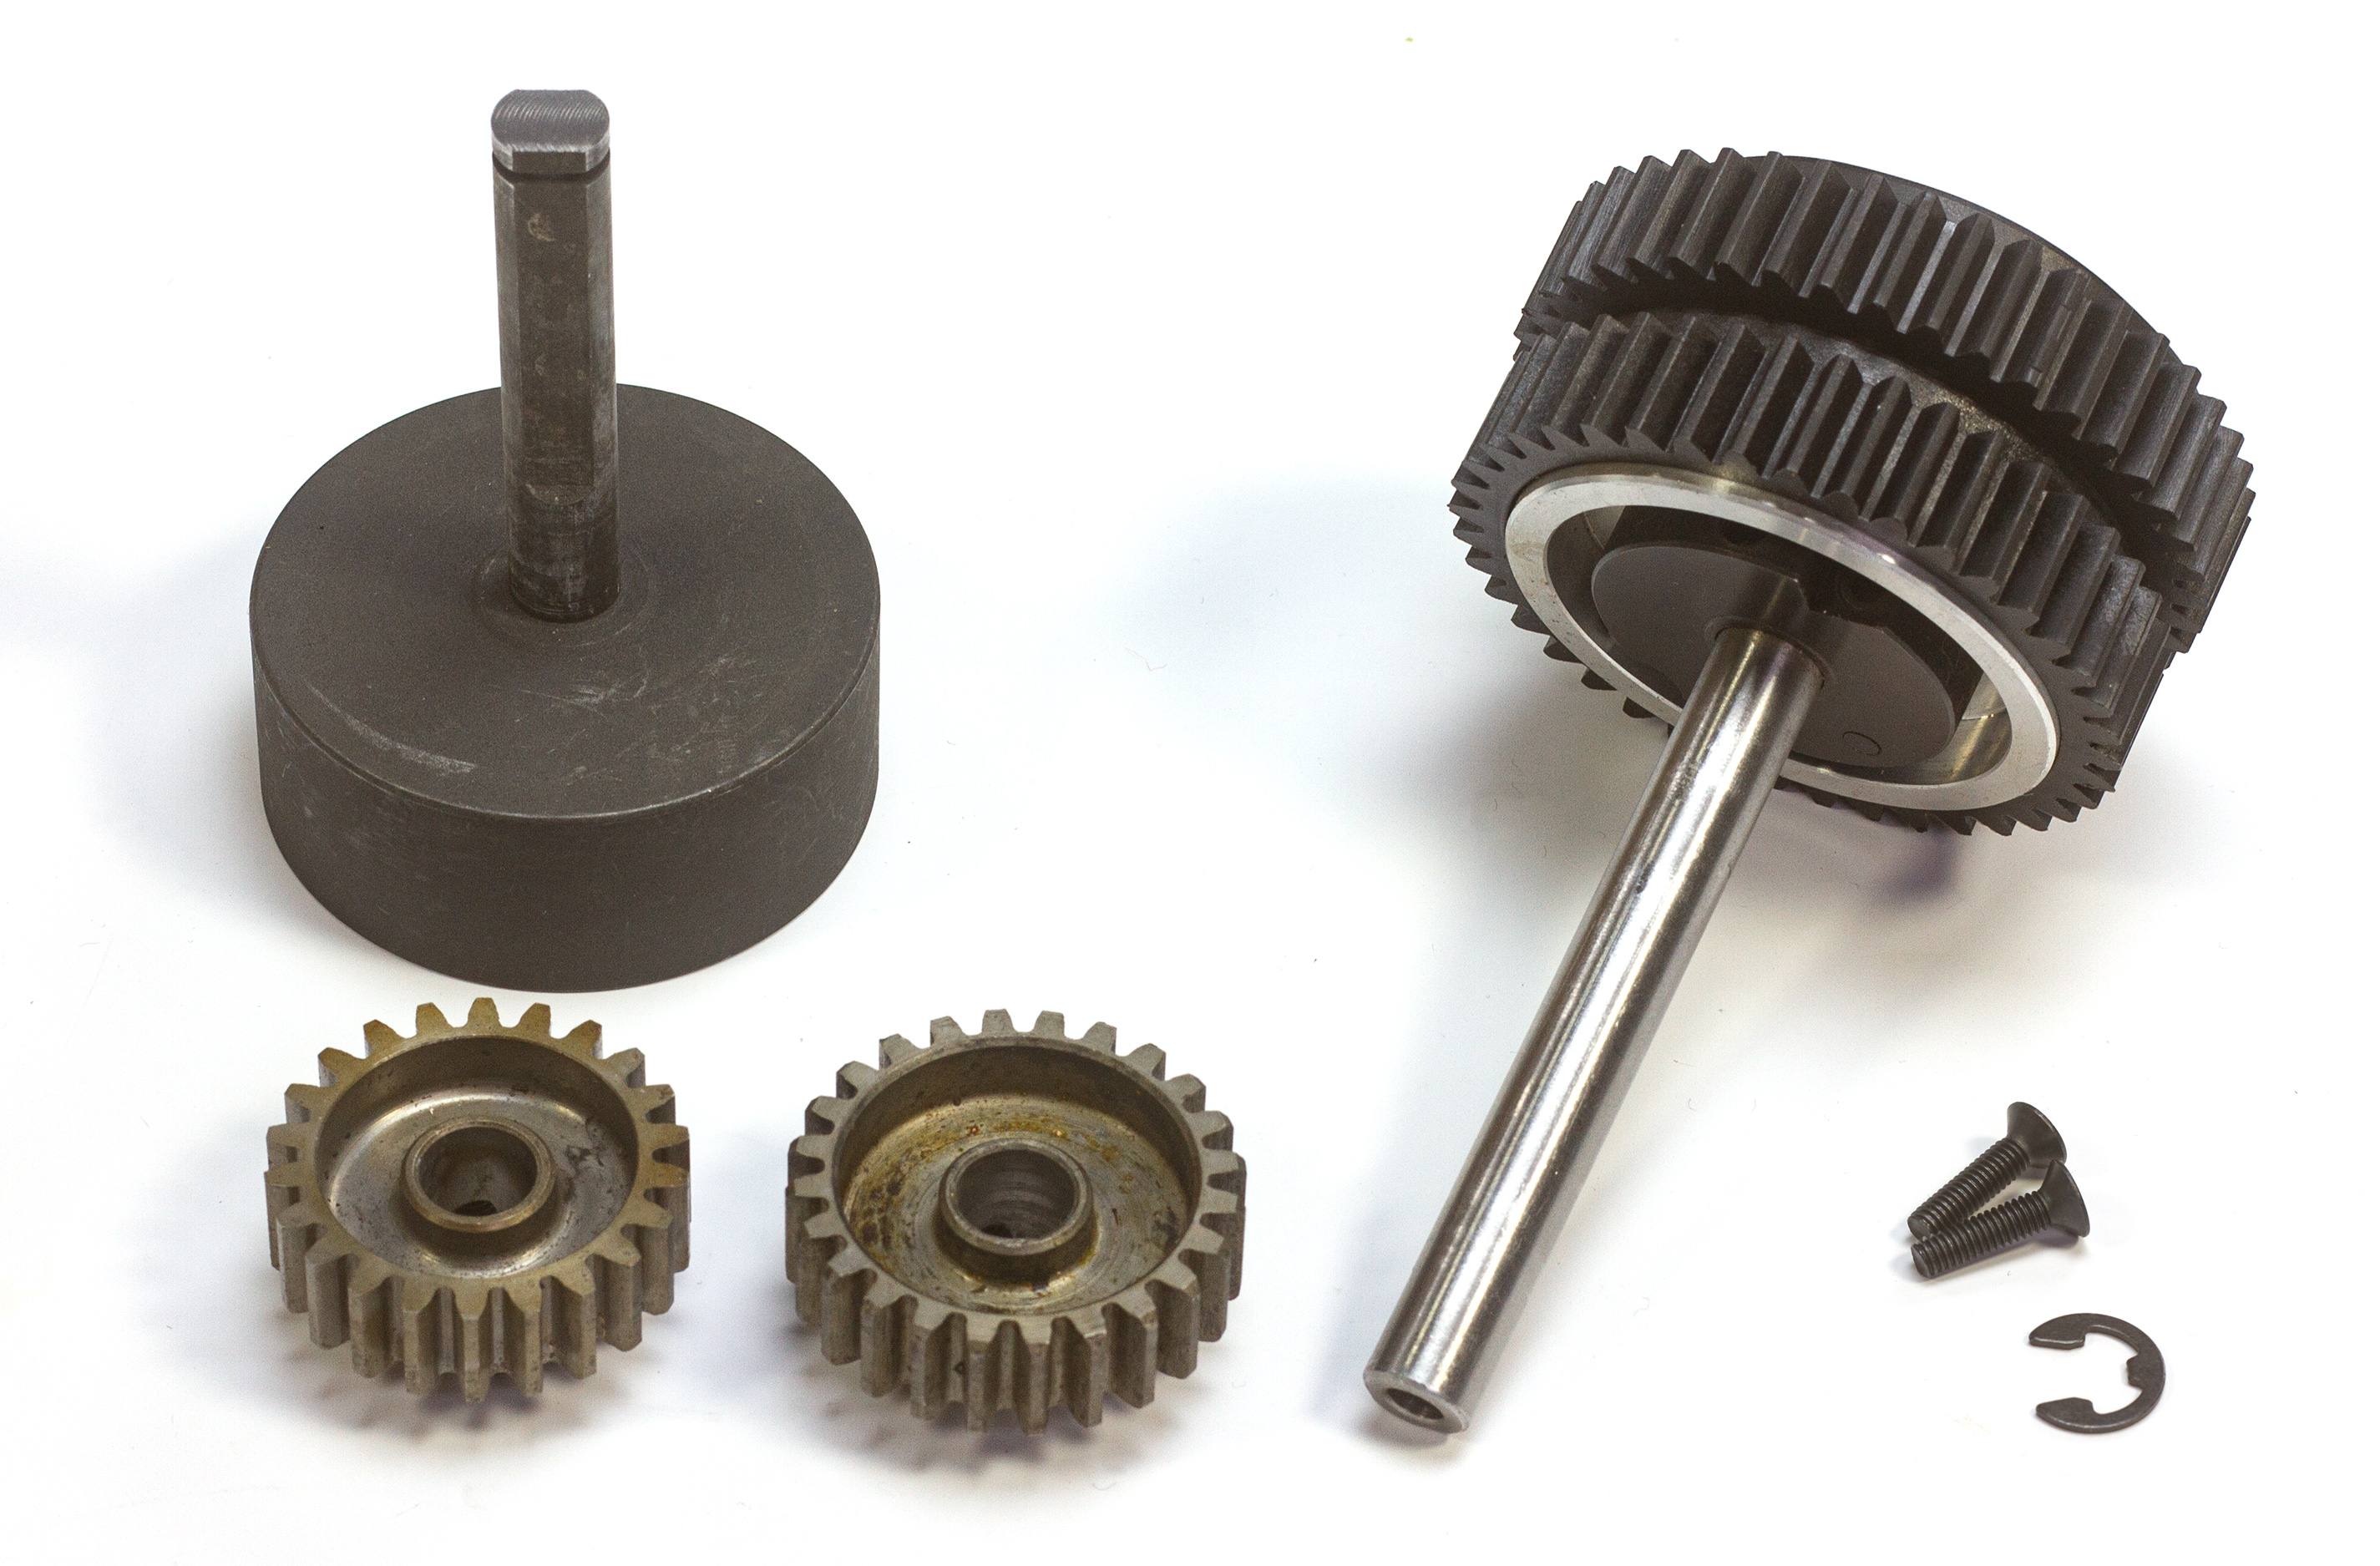 7450/09 2-speed gear box 1:5 for FG 1/5 scale touring cars and Carson C5, with Steel pinion